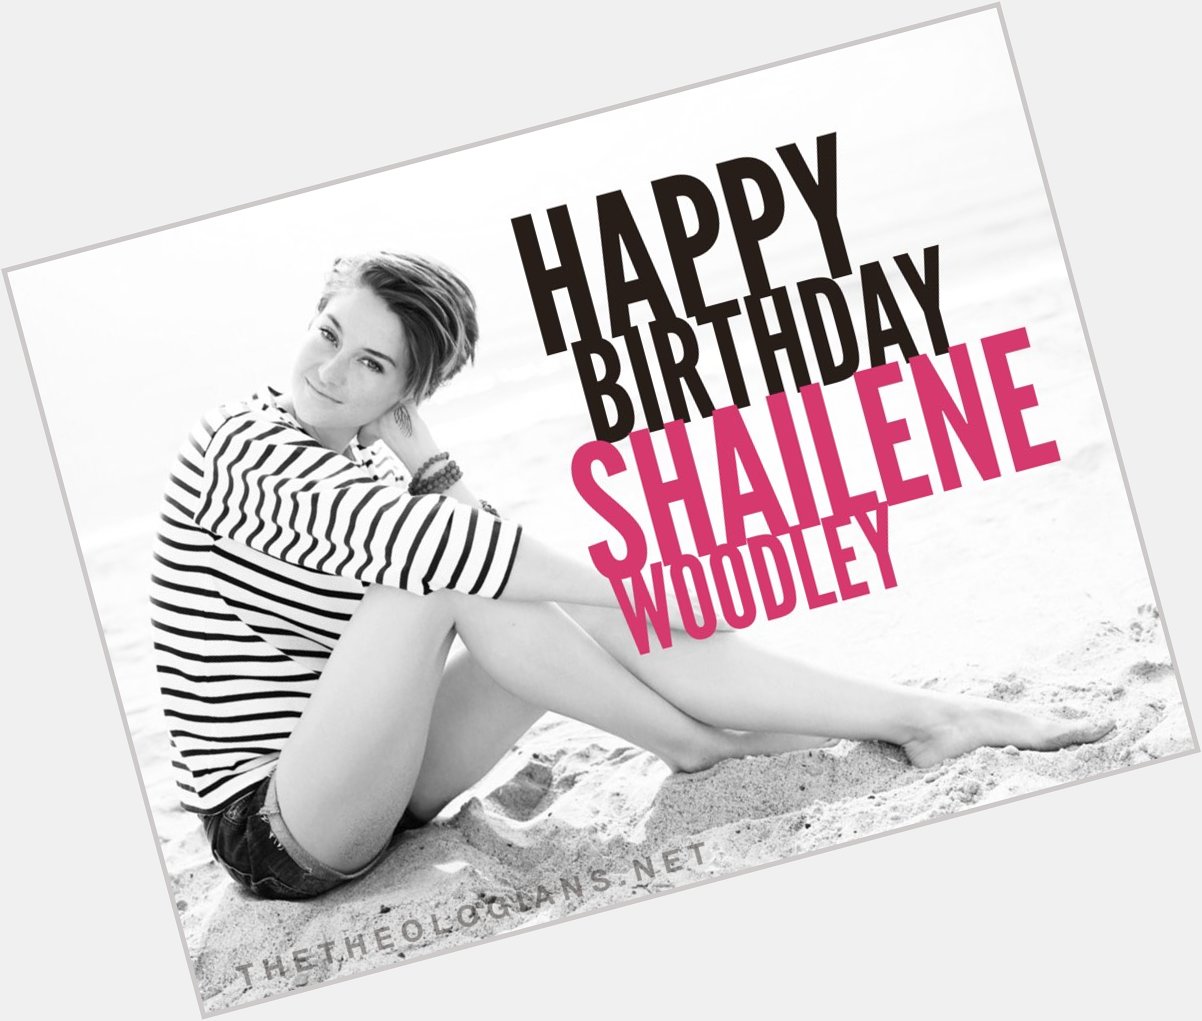 Happy 24th Birthday Shailene Woodley! You are an inspiration. Keep doing you! 